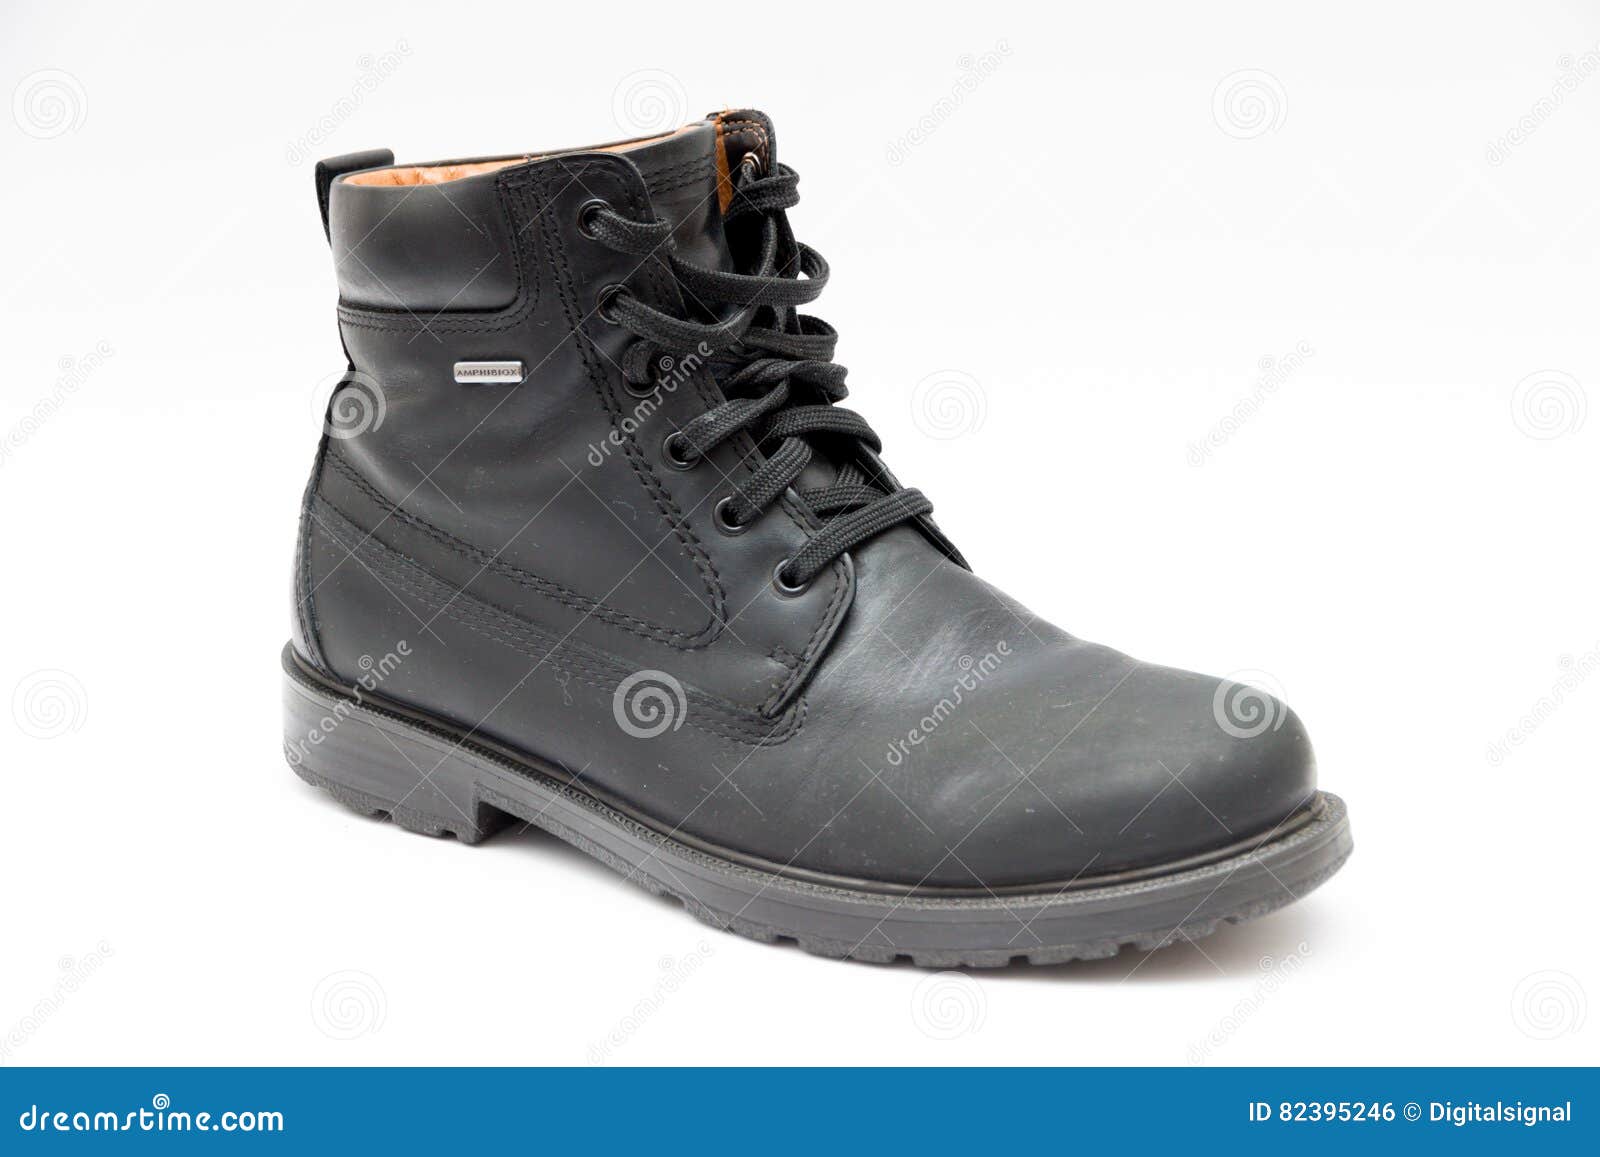 Geox Boot in Black Leather with Gore Tex Sole Editorial - Image of boot, perspire: 82395246